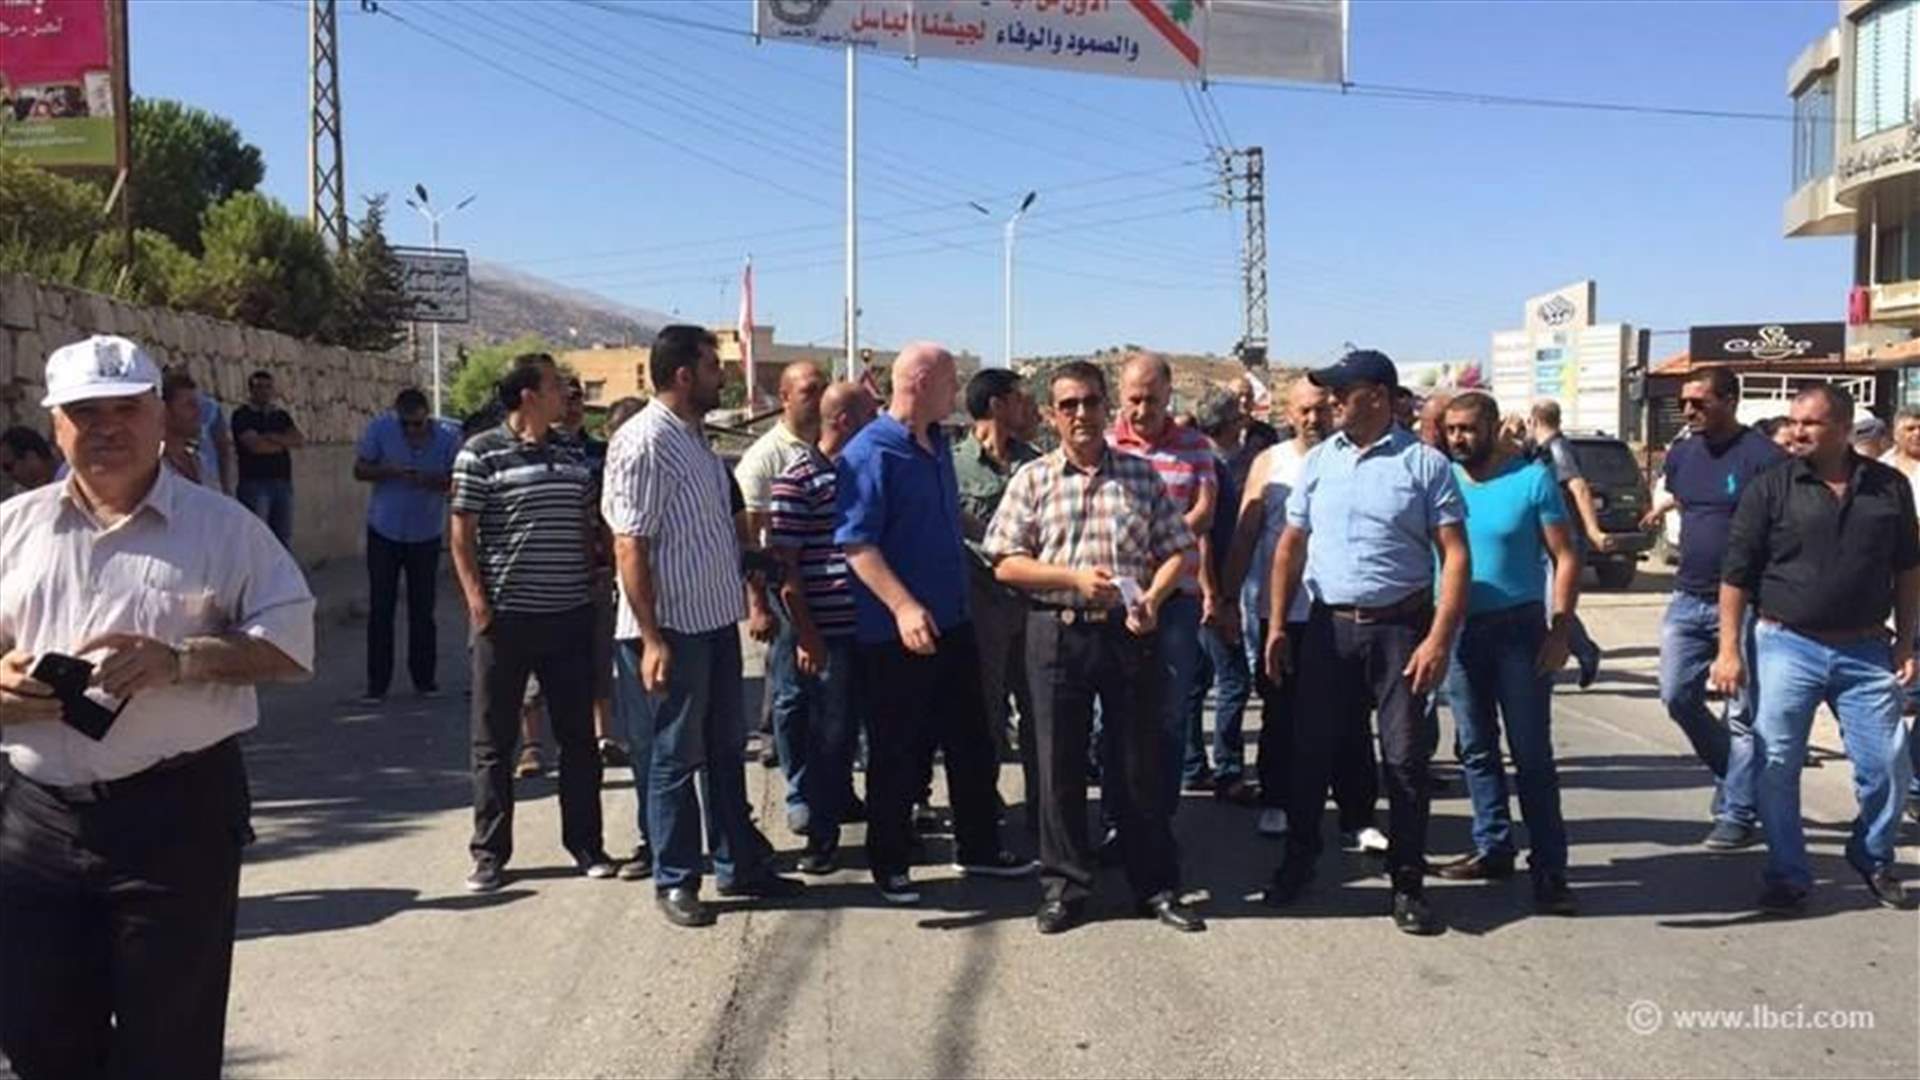 EDL contract workers stage movements across Lebanon